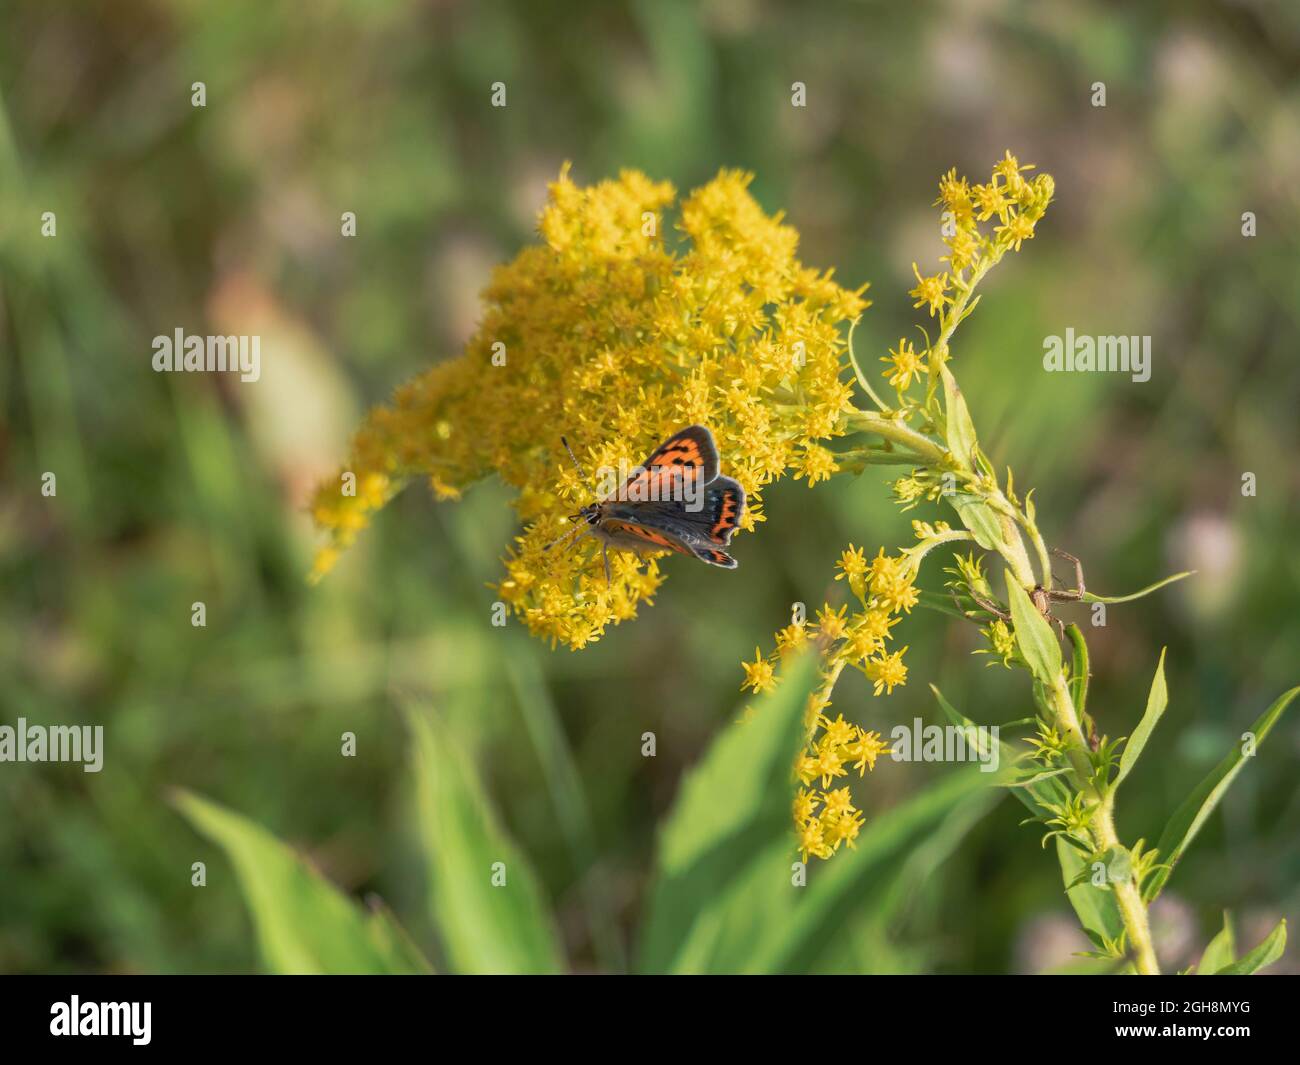 Tiny yellow flowers of goldenrod. Among the flowers, you can see a red butterfly sipping nectar from flowers. Stock Photo